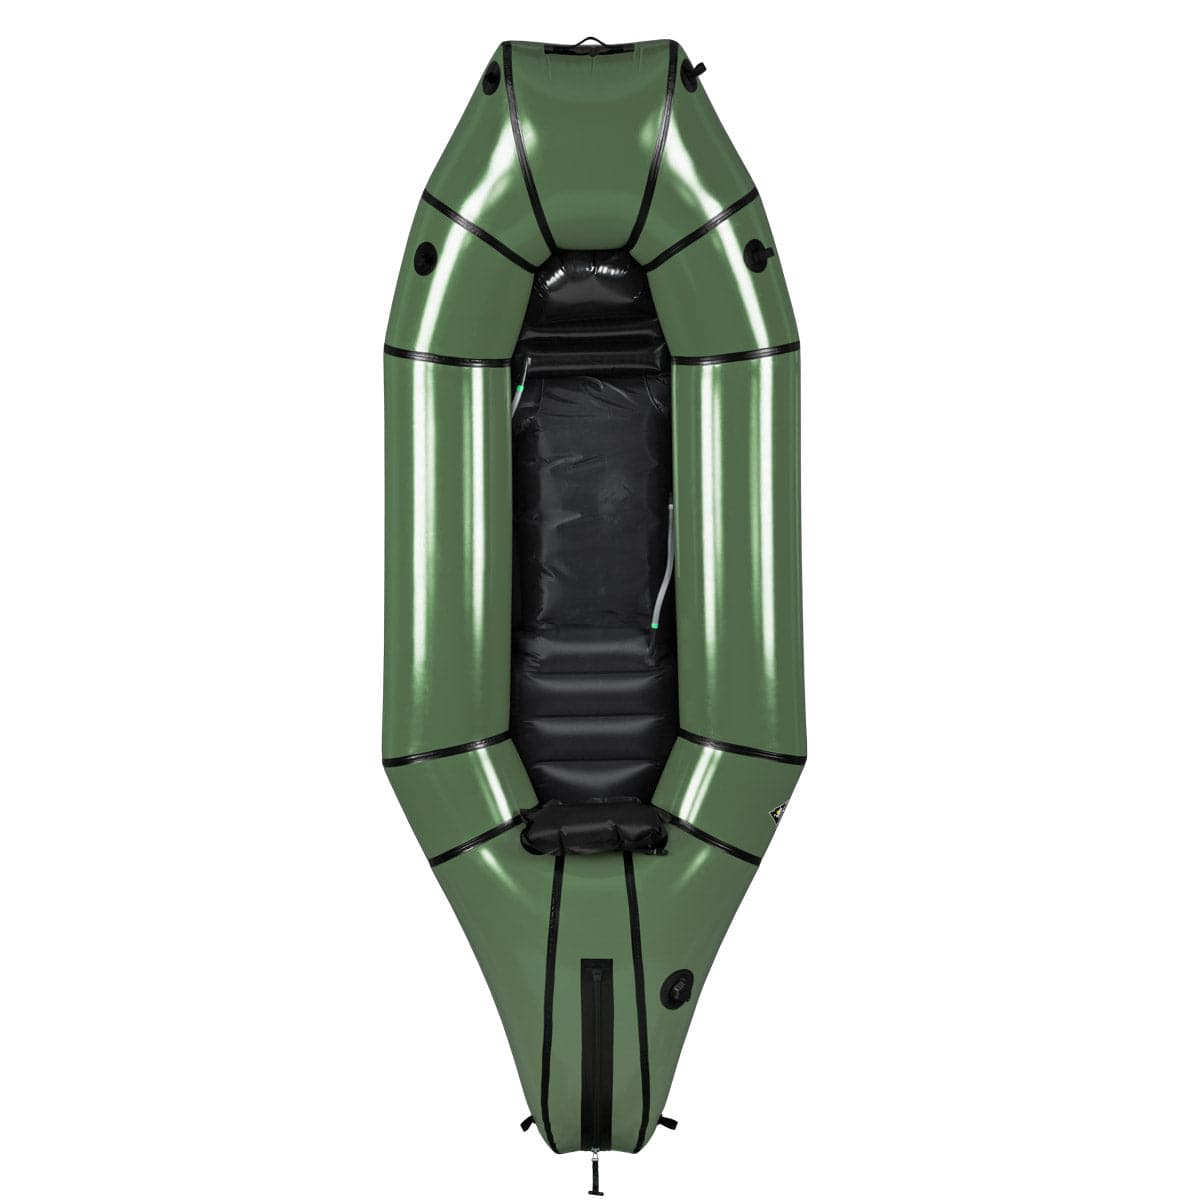 Featuring the Mule Open Deck pack raft manufactured by Alpacka shown here from one angle.